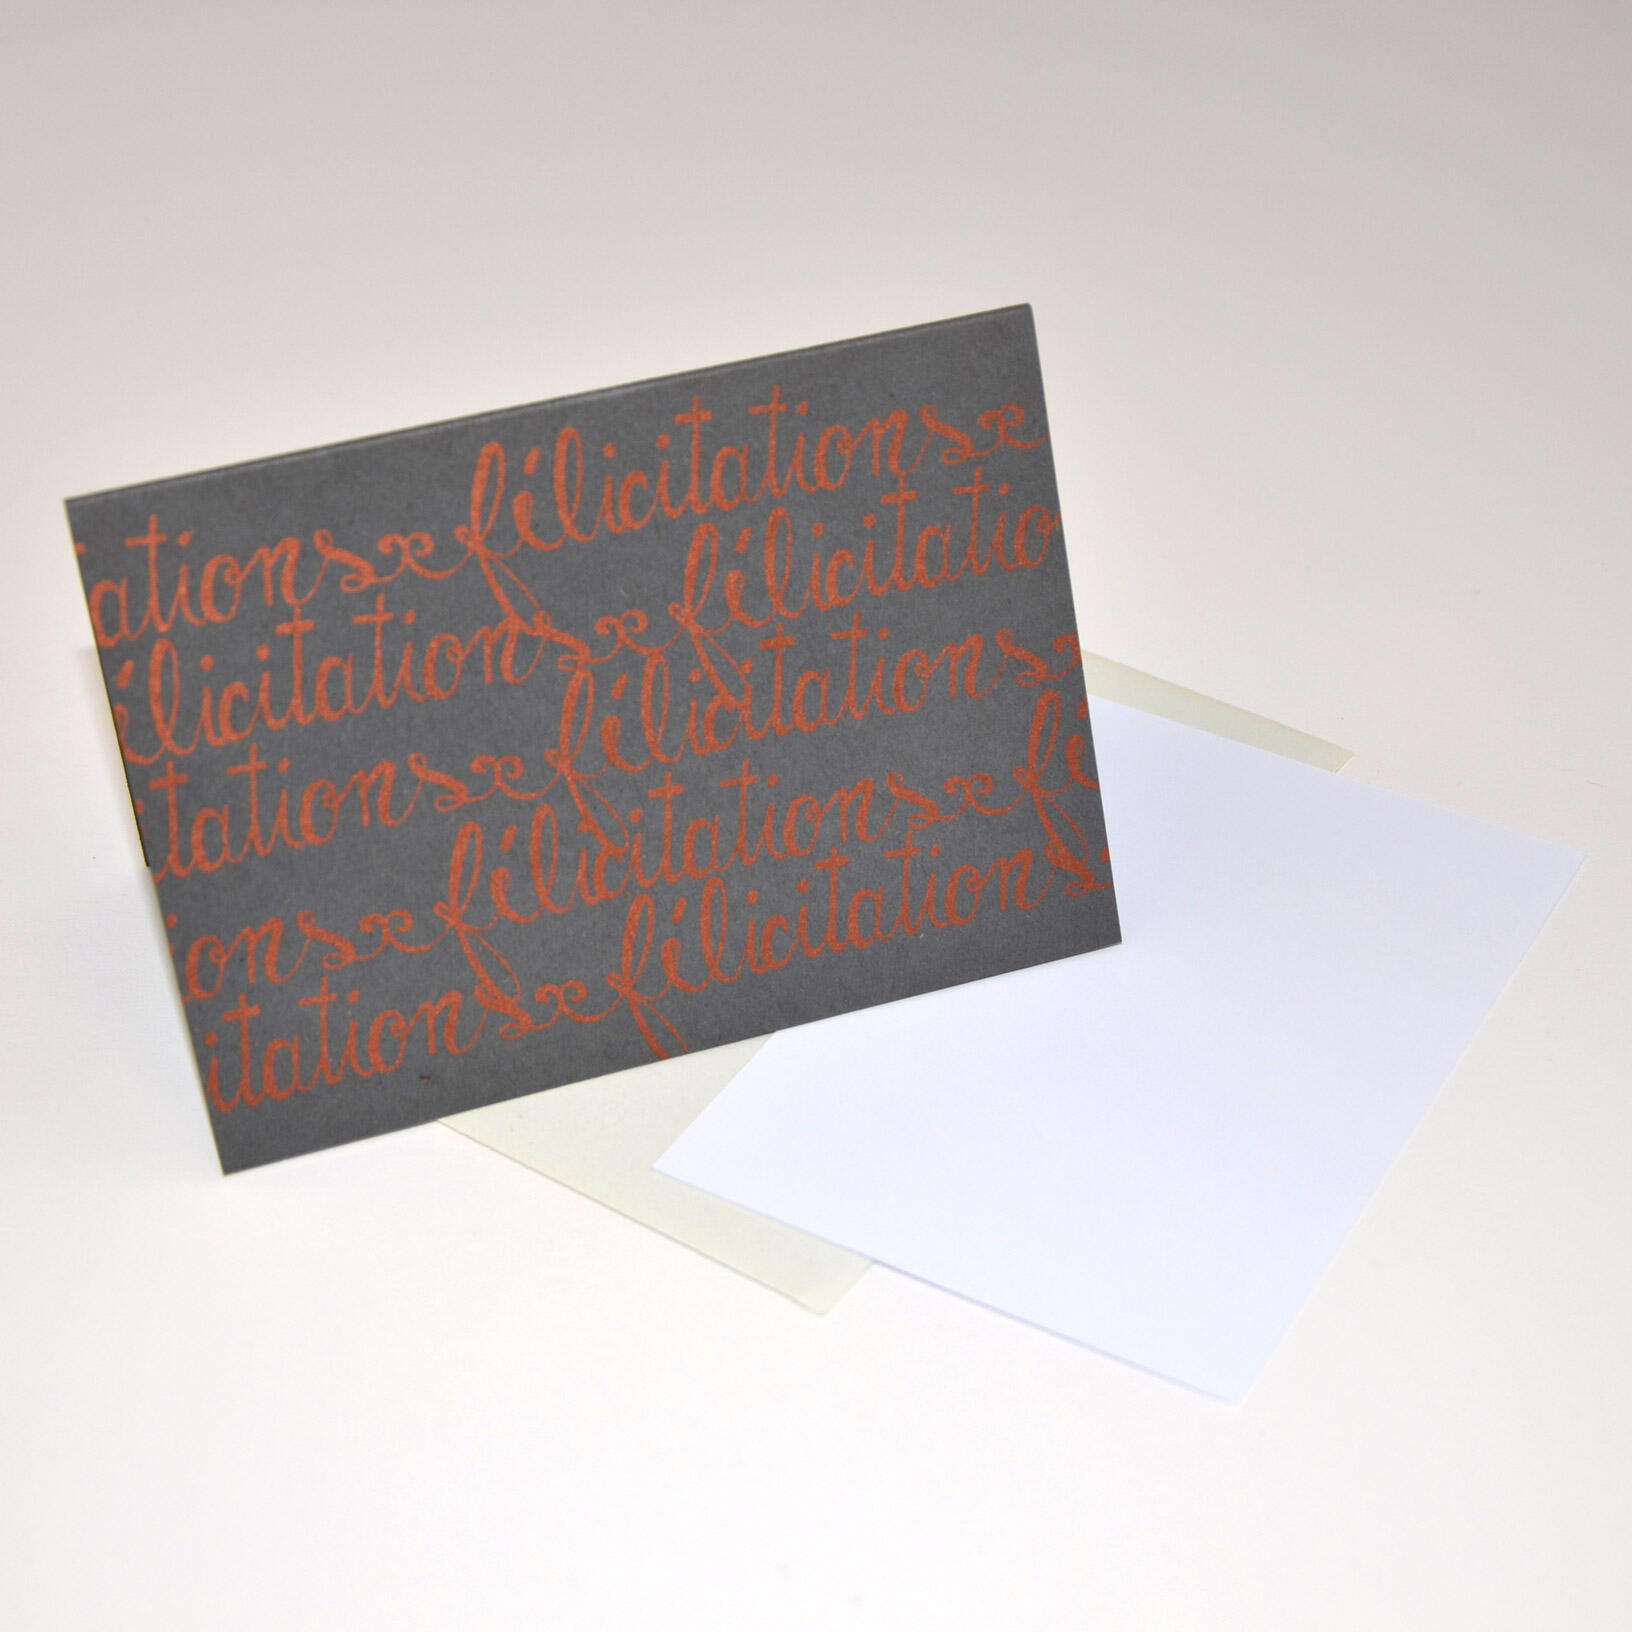 Greeting card "Félicitations", hand printed, in metallic font, with envelope